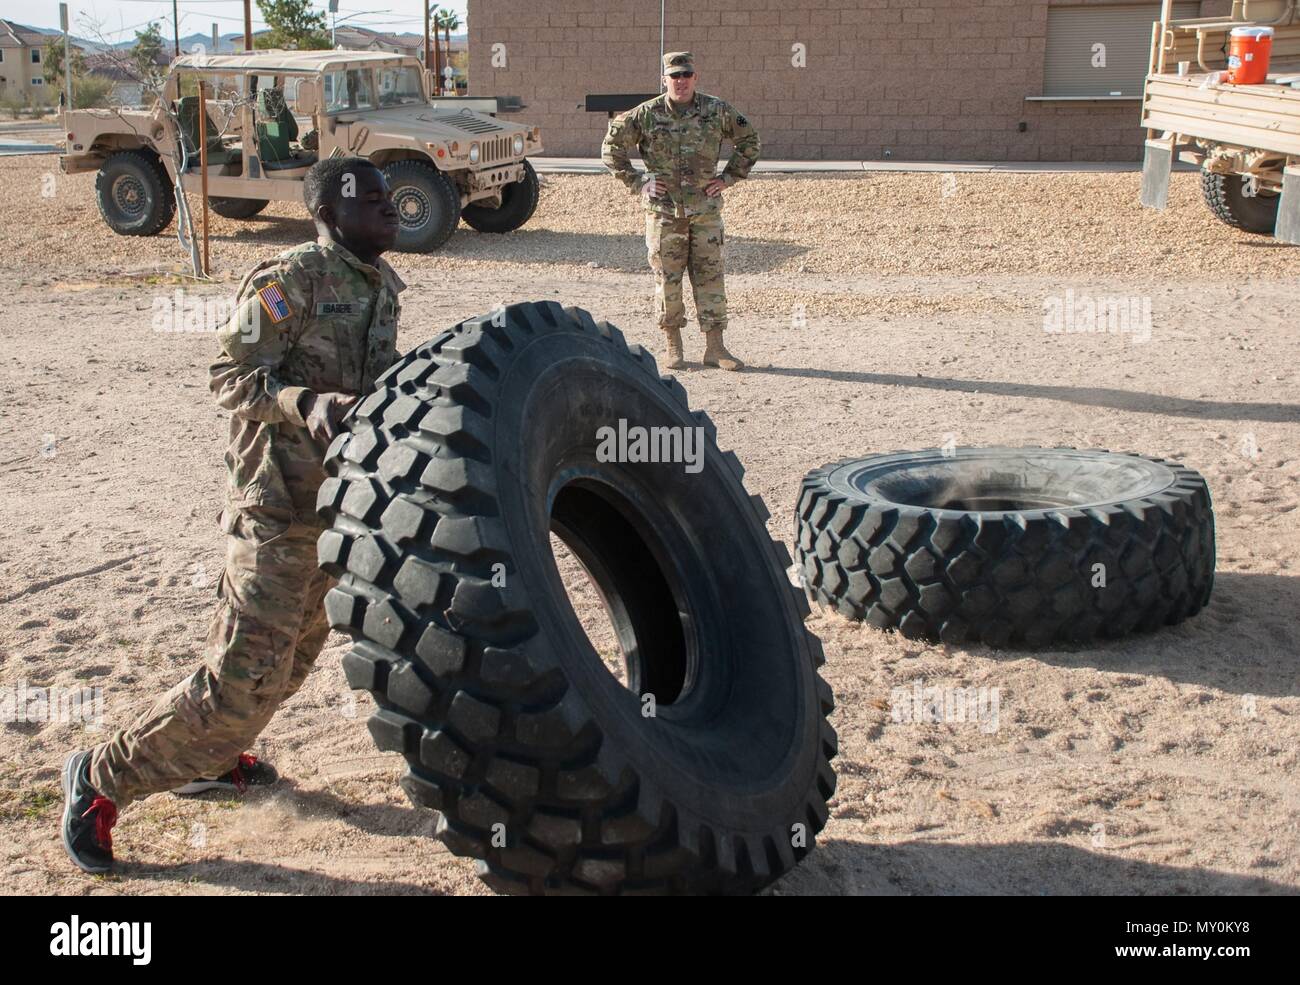 FORT IRWIN, Calif. — U.S. Army Staff Sgt. Schandorf Asabere, E Troop, 2nd Squadron, 11th Armored Cavalry Regiment, flips a tire during the physical fitness portion of the NCO of the Quarter competition.  Schandorf earned the honor of being named Fort Irwin‘s NCO of the Quarter, 1st quarter, 2017.  The NCO of the Quarter board is a daylong event designed to evaluate the NCO’s, both physically and mentally. (U.S. Army photo by Sgt. David Edge) Stock Photo